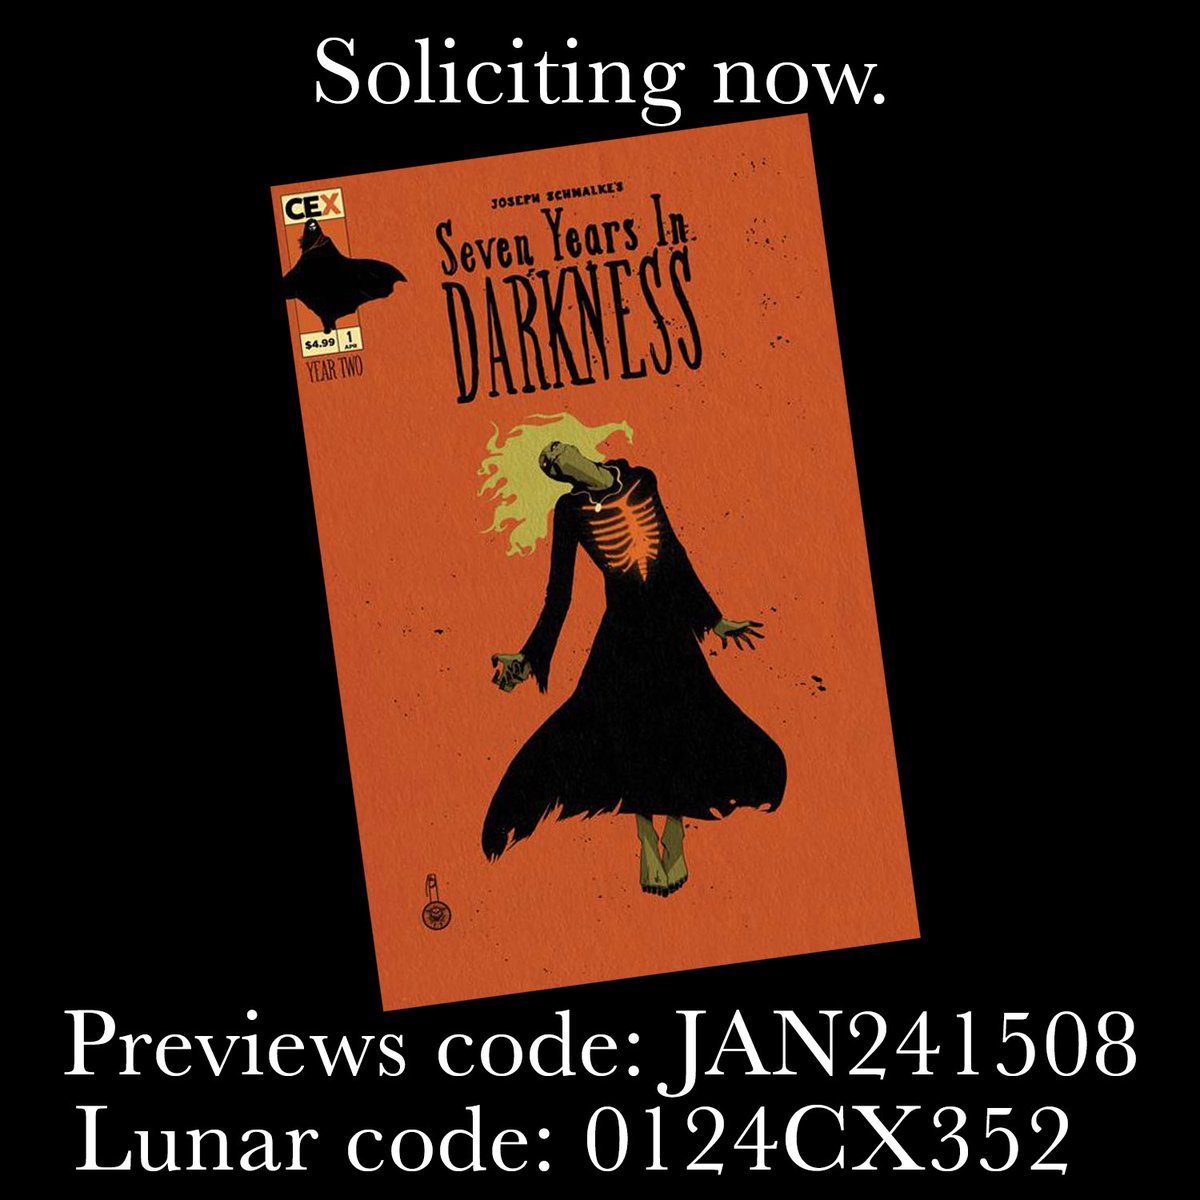 SEVEN YEARS IN DARKNESS YEAR TWO #1 is a NEW series soliciting now on Diamond and Lunar. Make sure you add it to your pull list (the slight name change of year two might bump it from your current pull list). @CEXPublishing